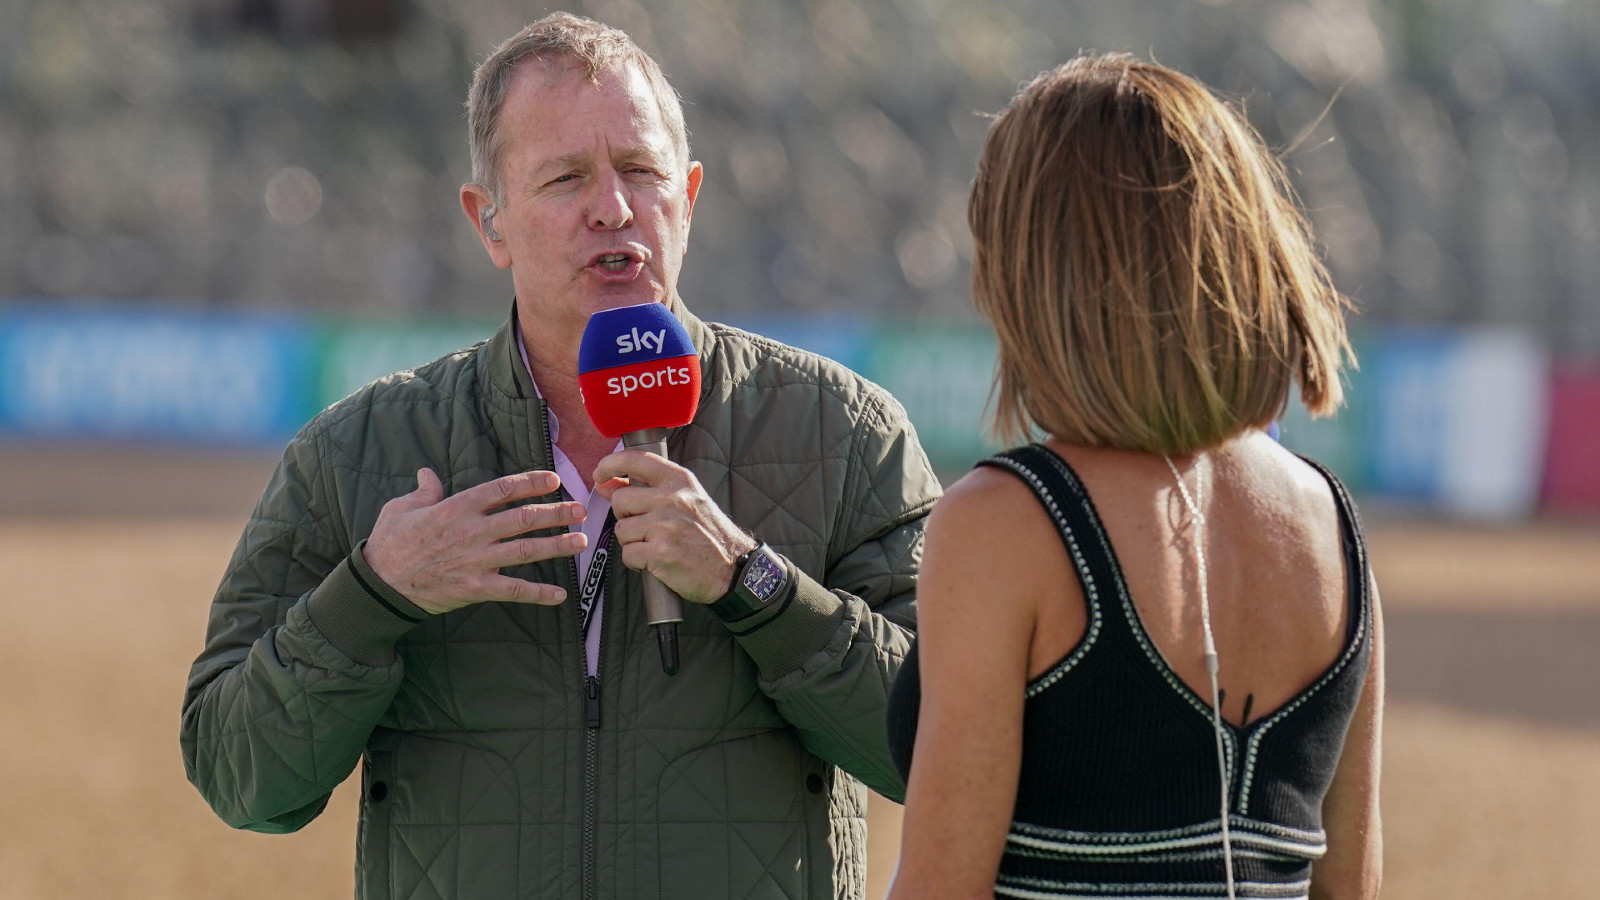 Sky F1's Martin Brundle at the Hungarian Grand Prix.